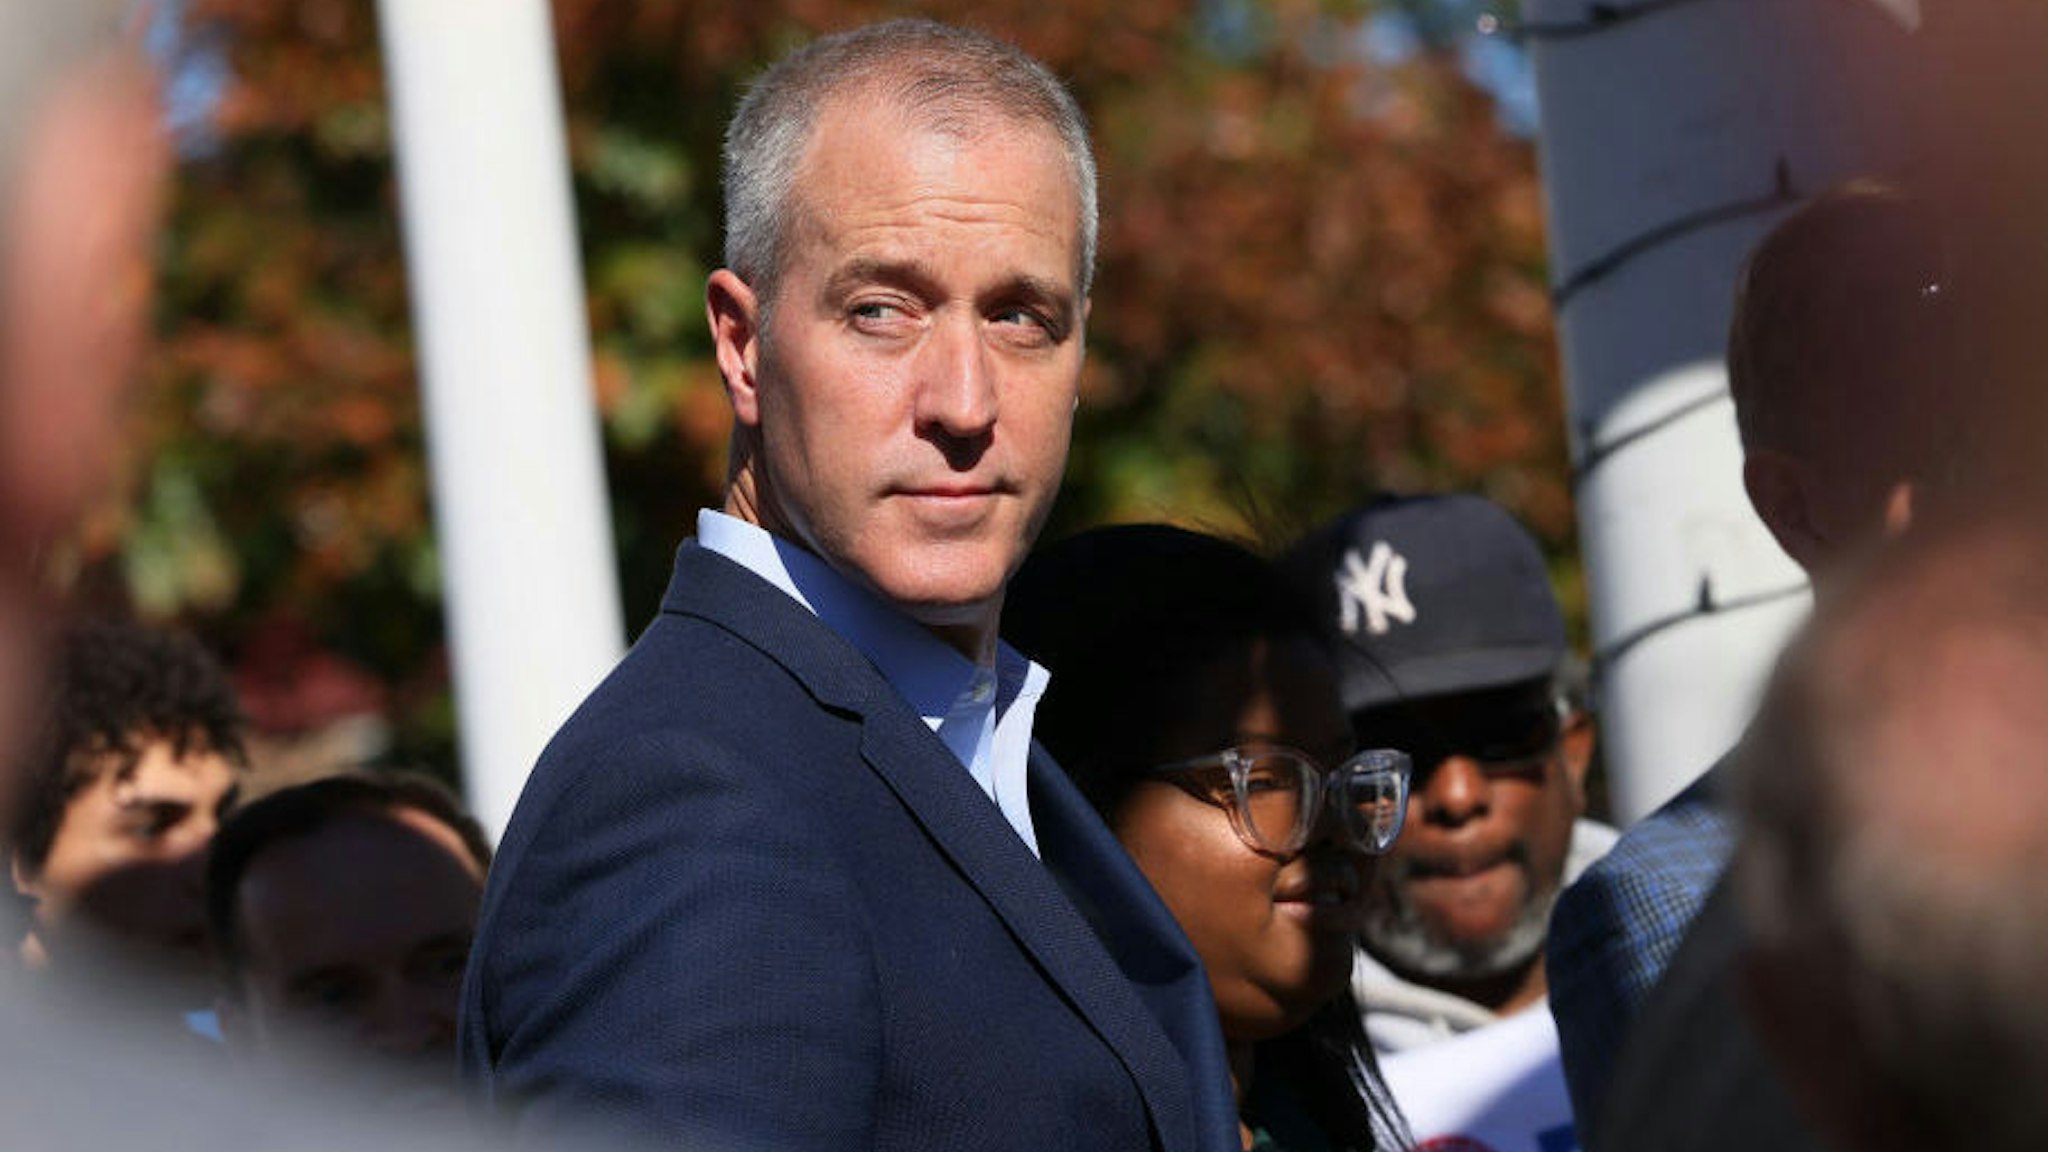 Rep. Sean Patrick Maloney (D-NY) looks into the crowd as he listens to Former President Bill Clinton speak during a rally at Nyack Veteran's Memorial Park on October 29, 2022 in Nyack, New York.